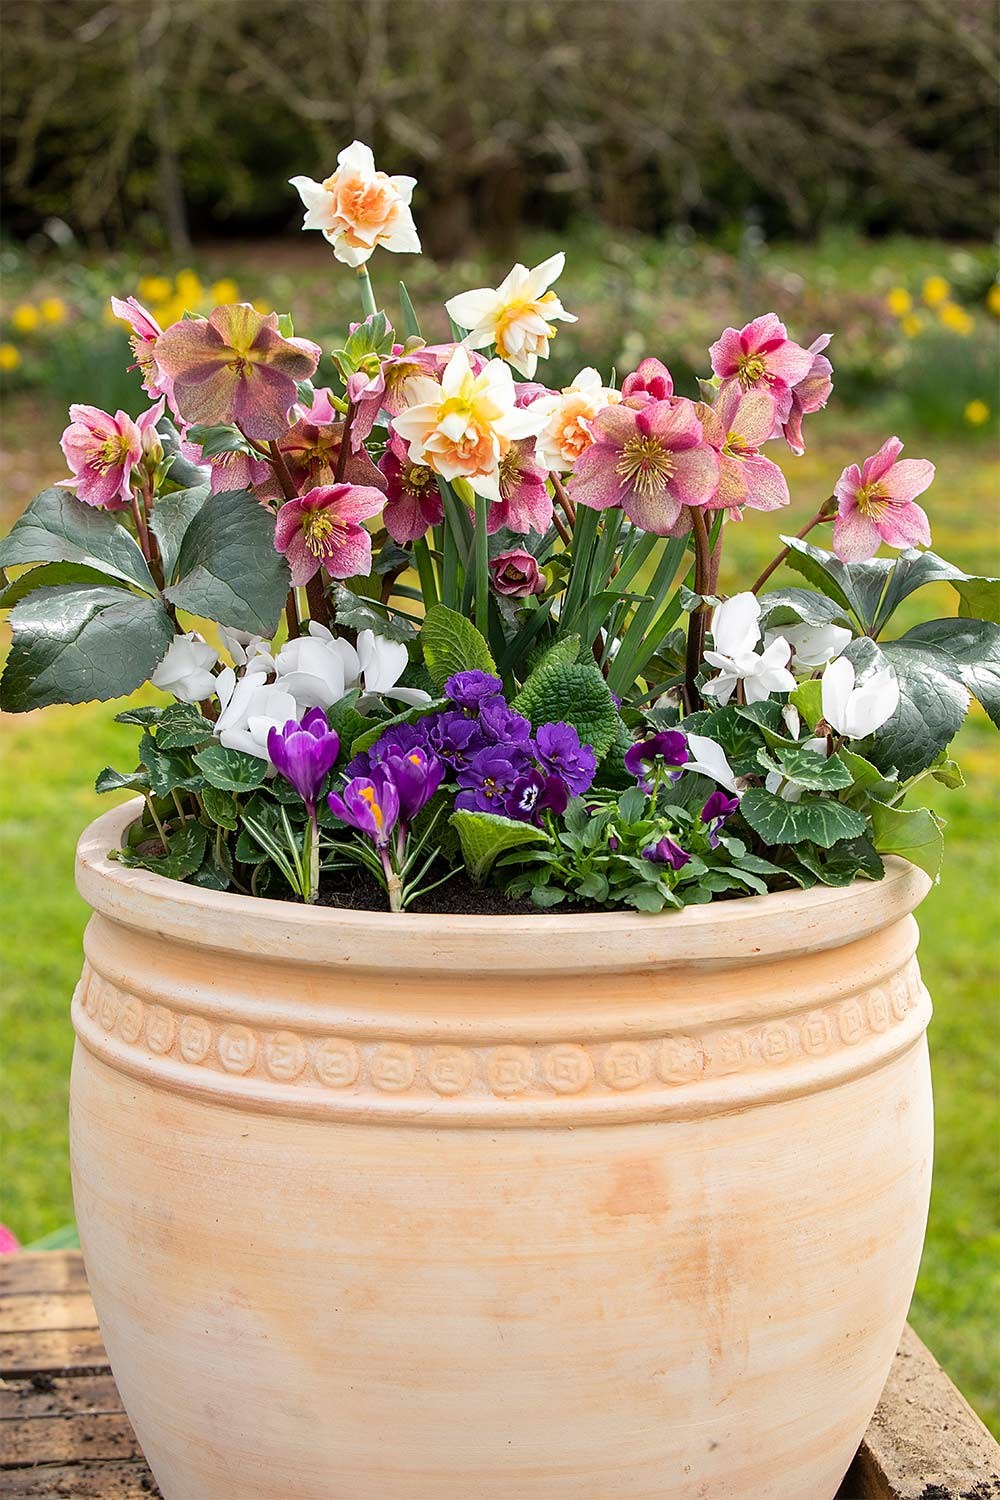 How to make beautiful flower pots at home | Better Homes and Gardens